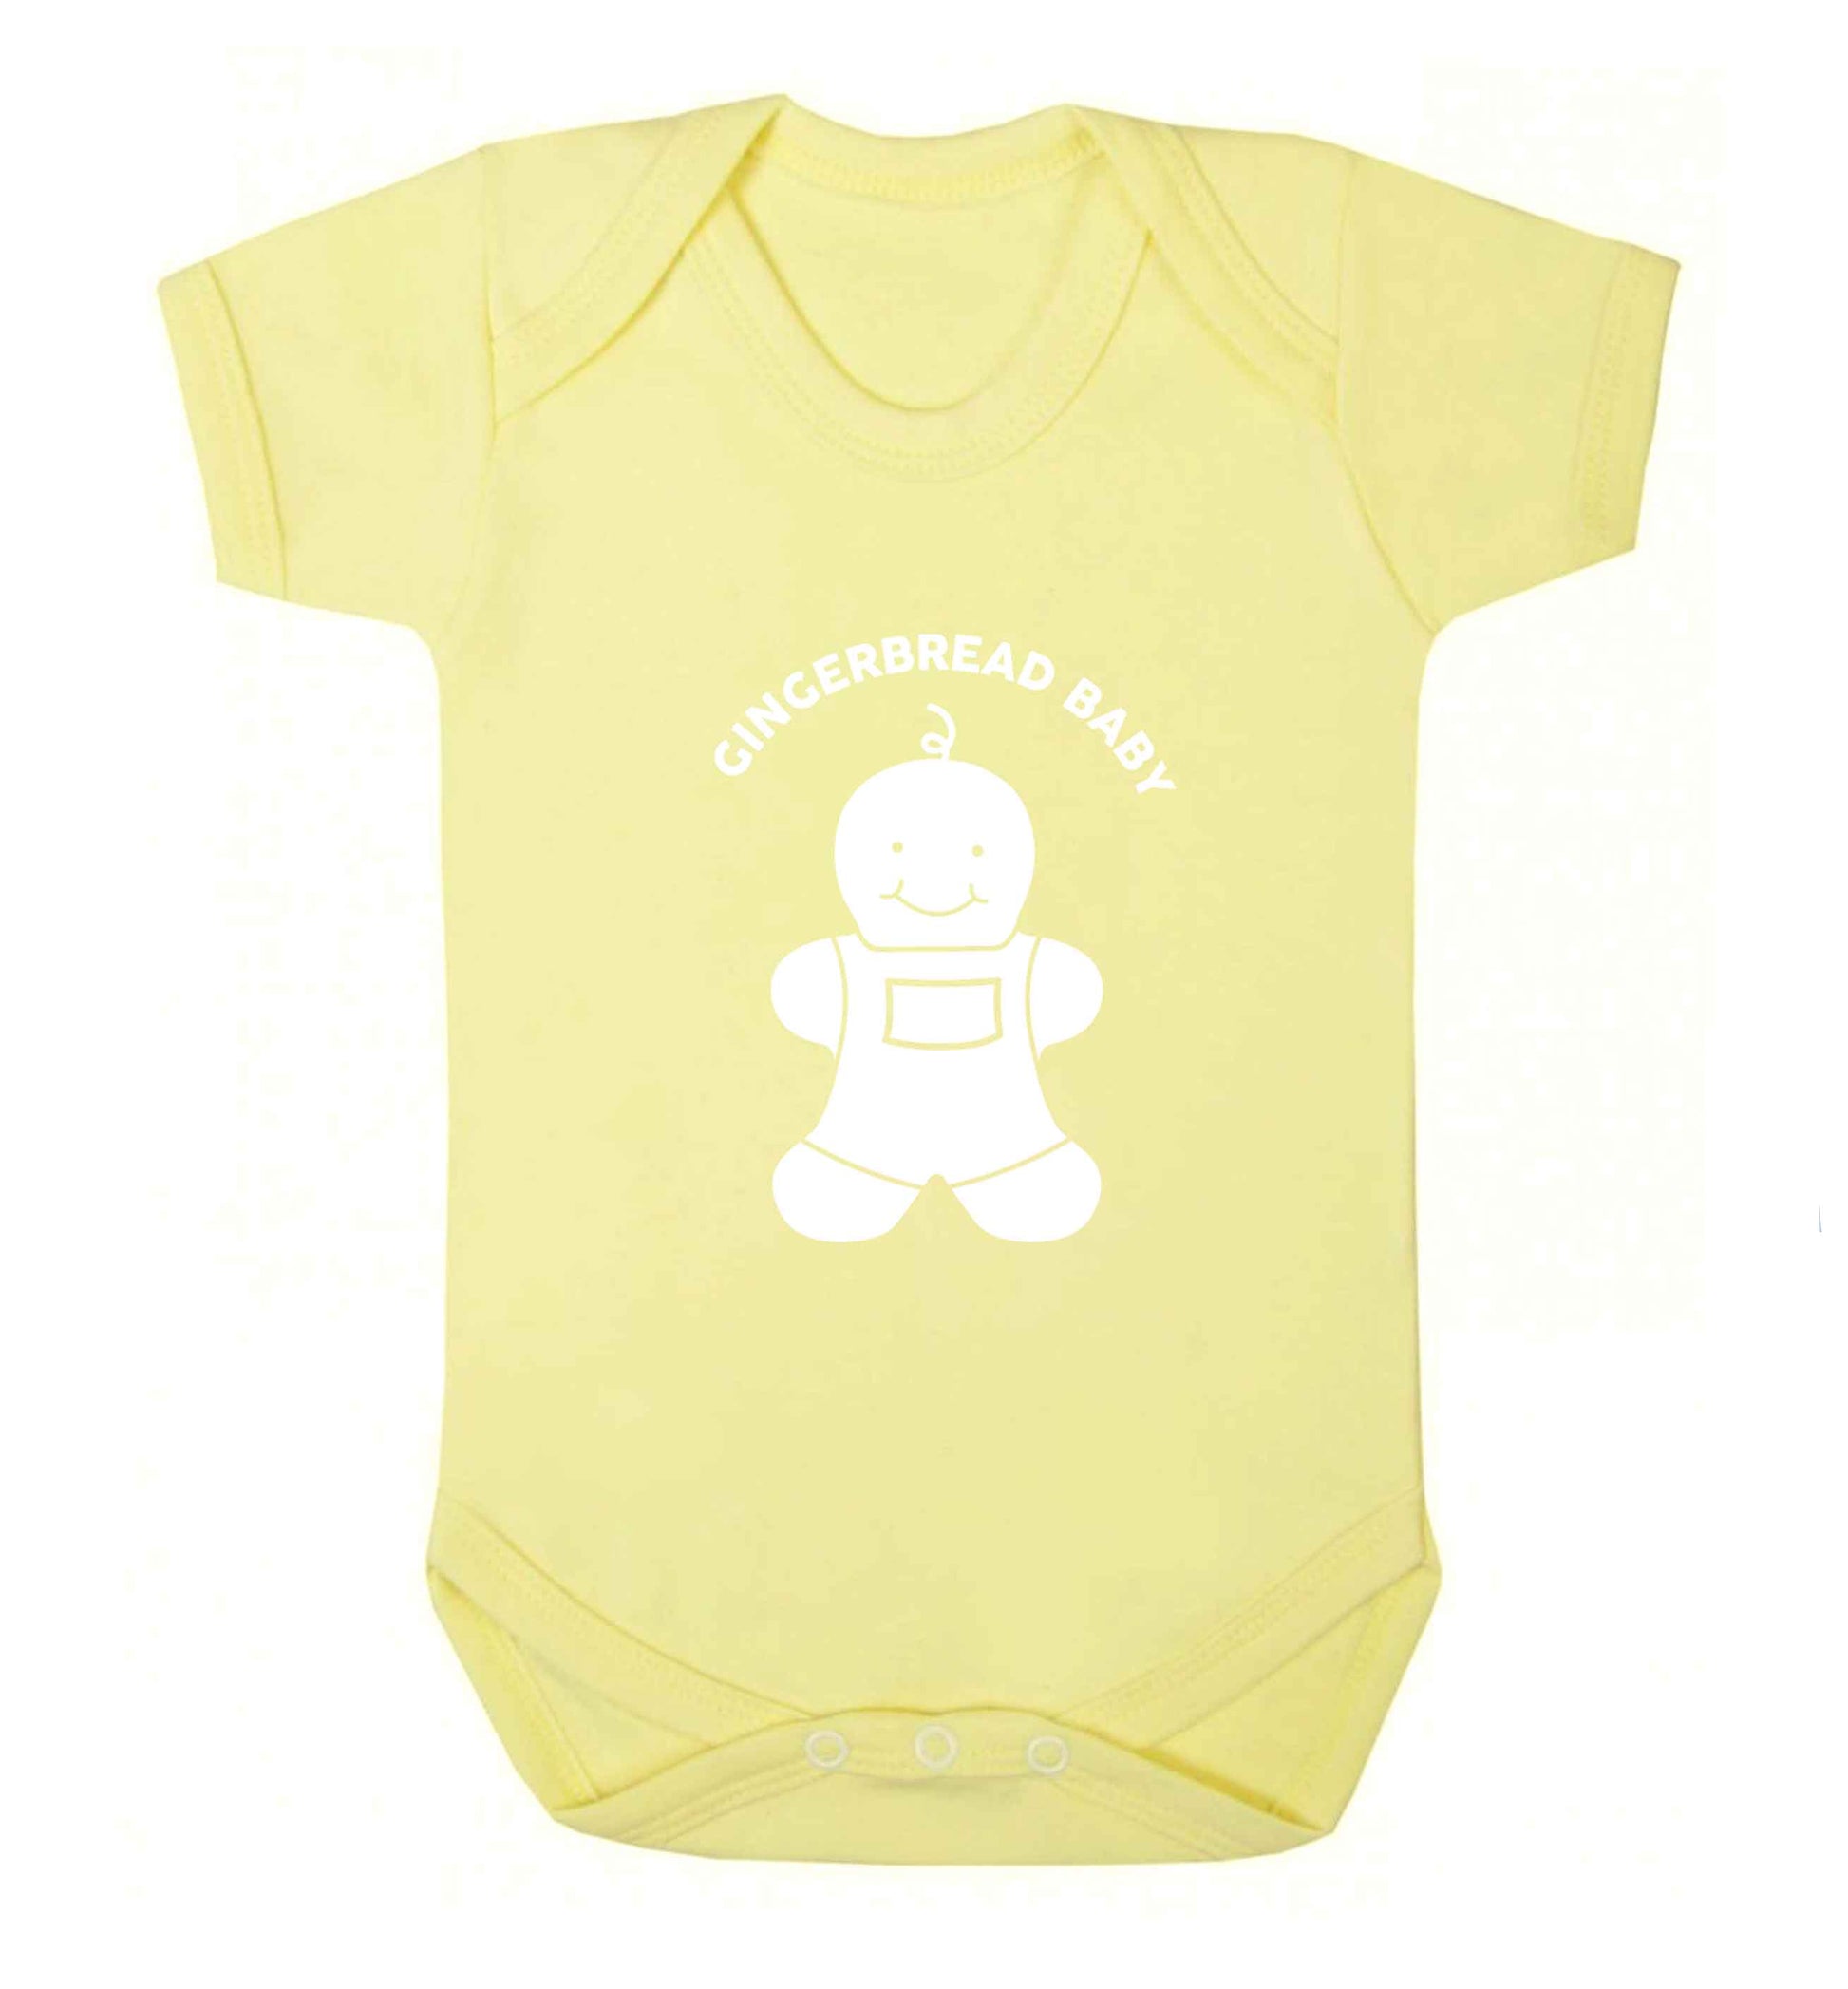 Gingerbread baby baby vest pale yellow 18-24 months